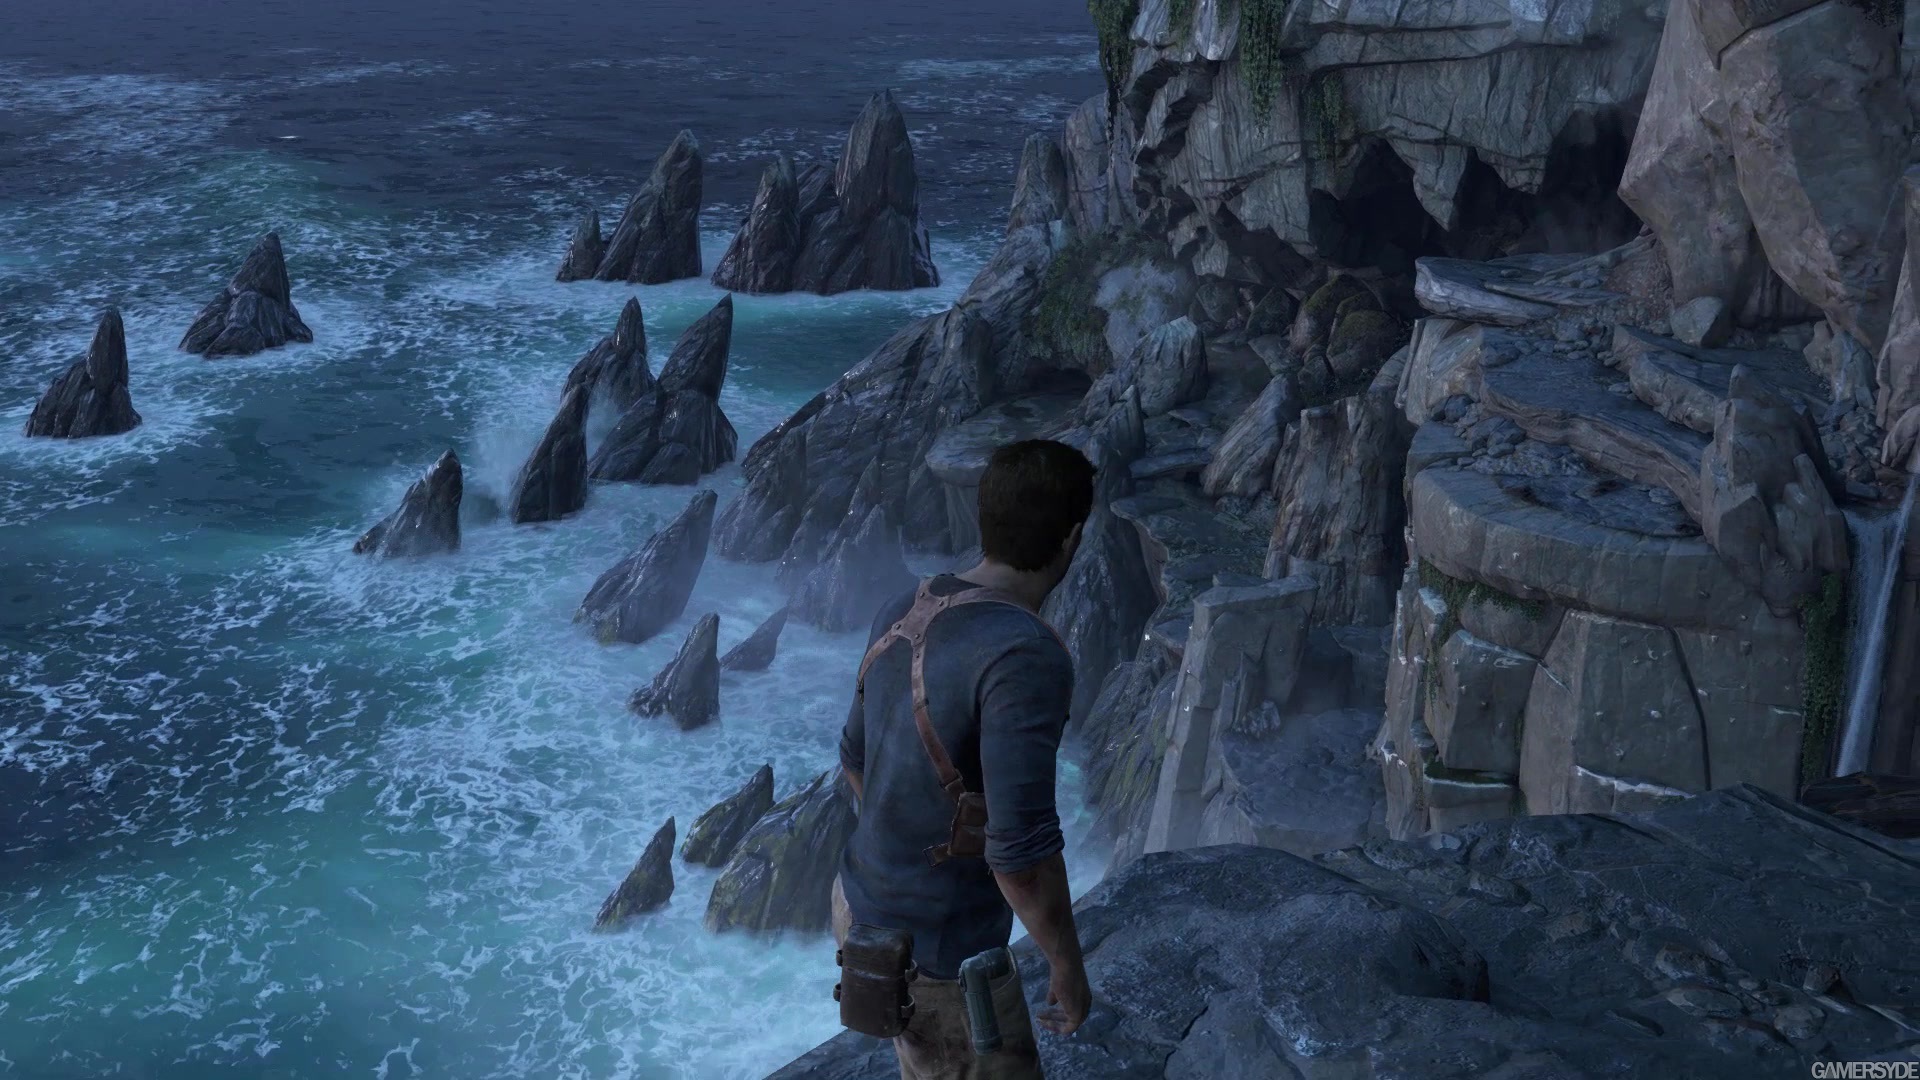 Неизведанные 4. Uncharted 4: a Thief’s end. Uncharted 4 город. Uncharted 4 Level. Uncharted 4 Water.